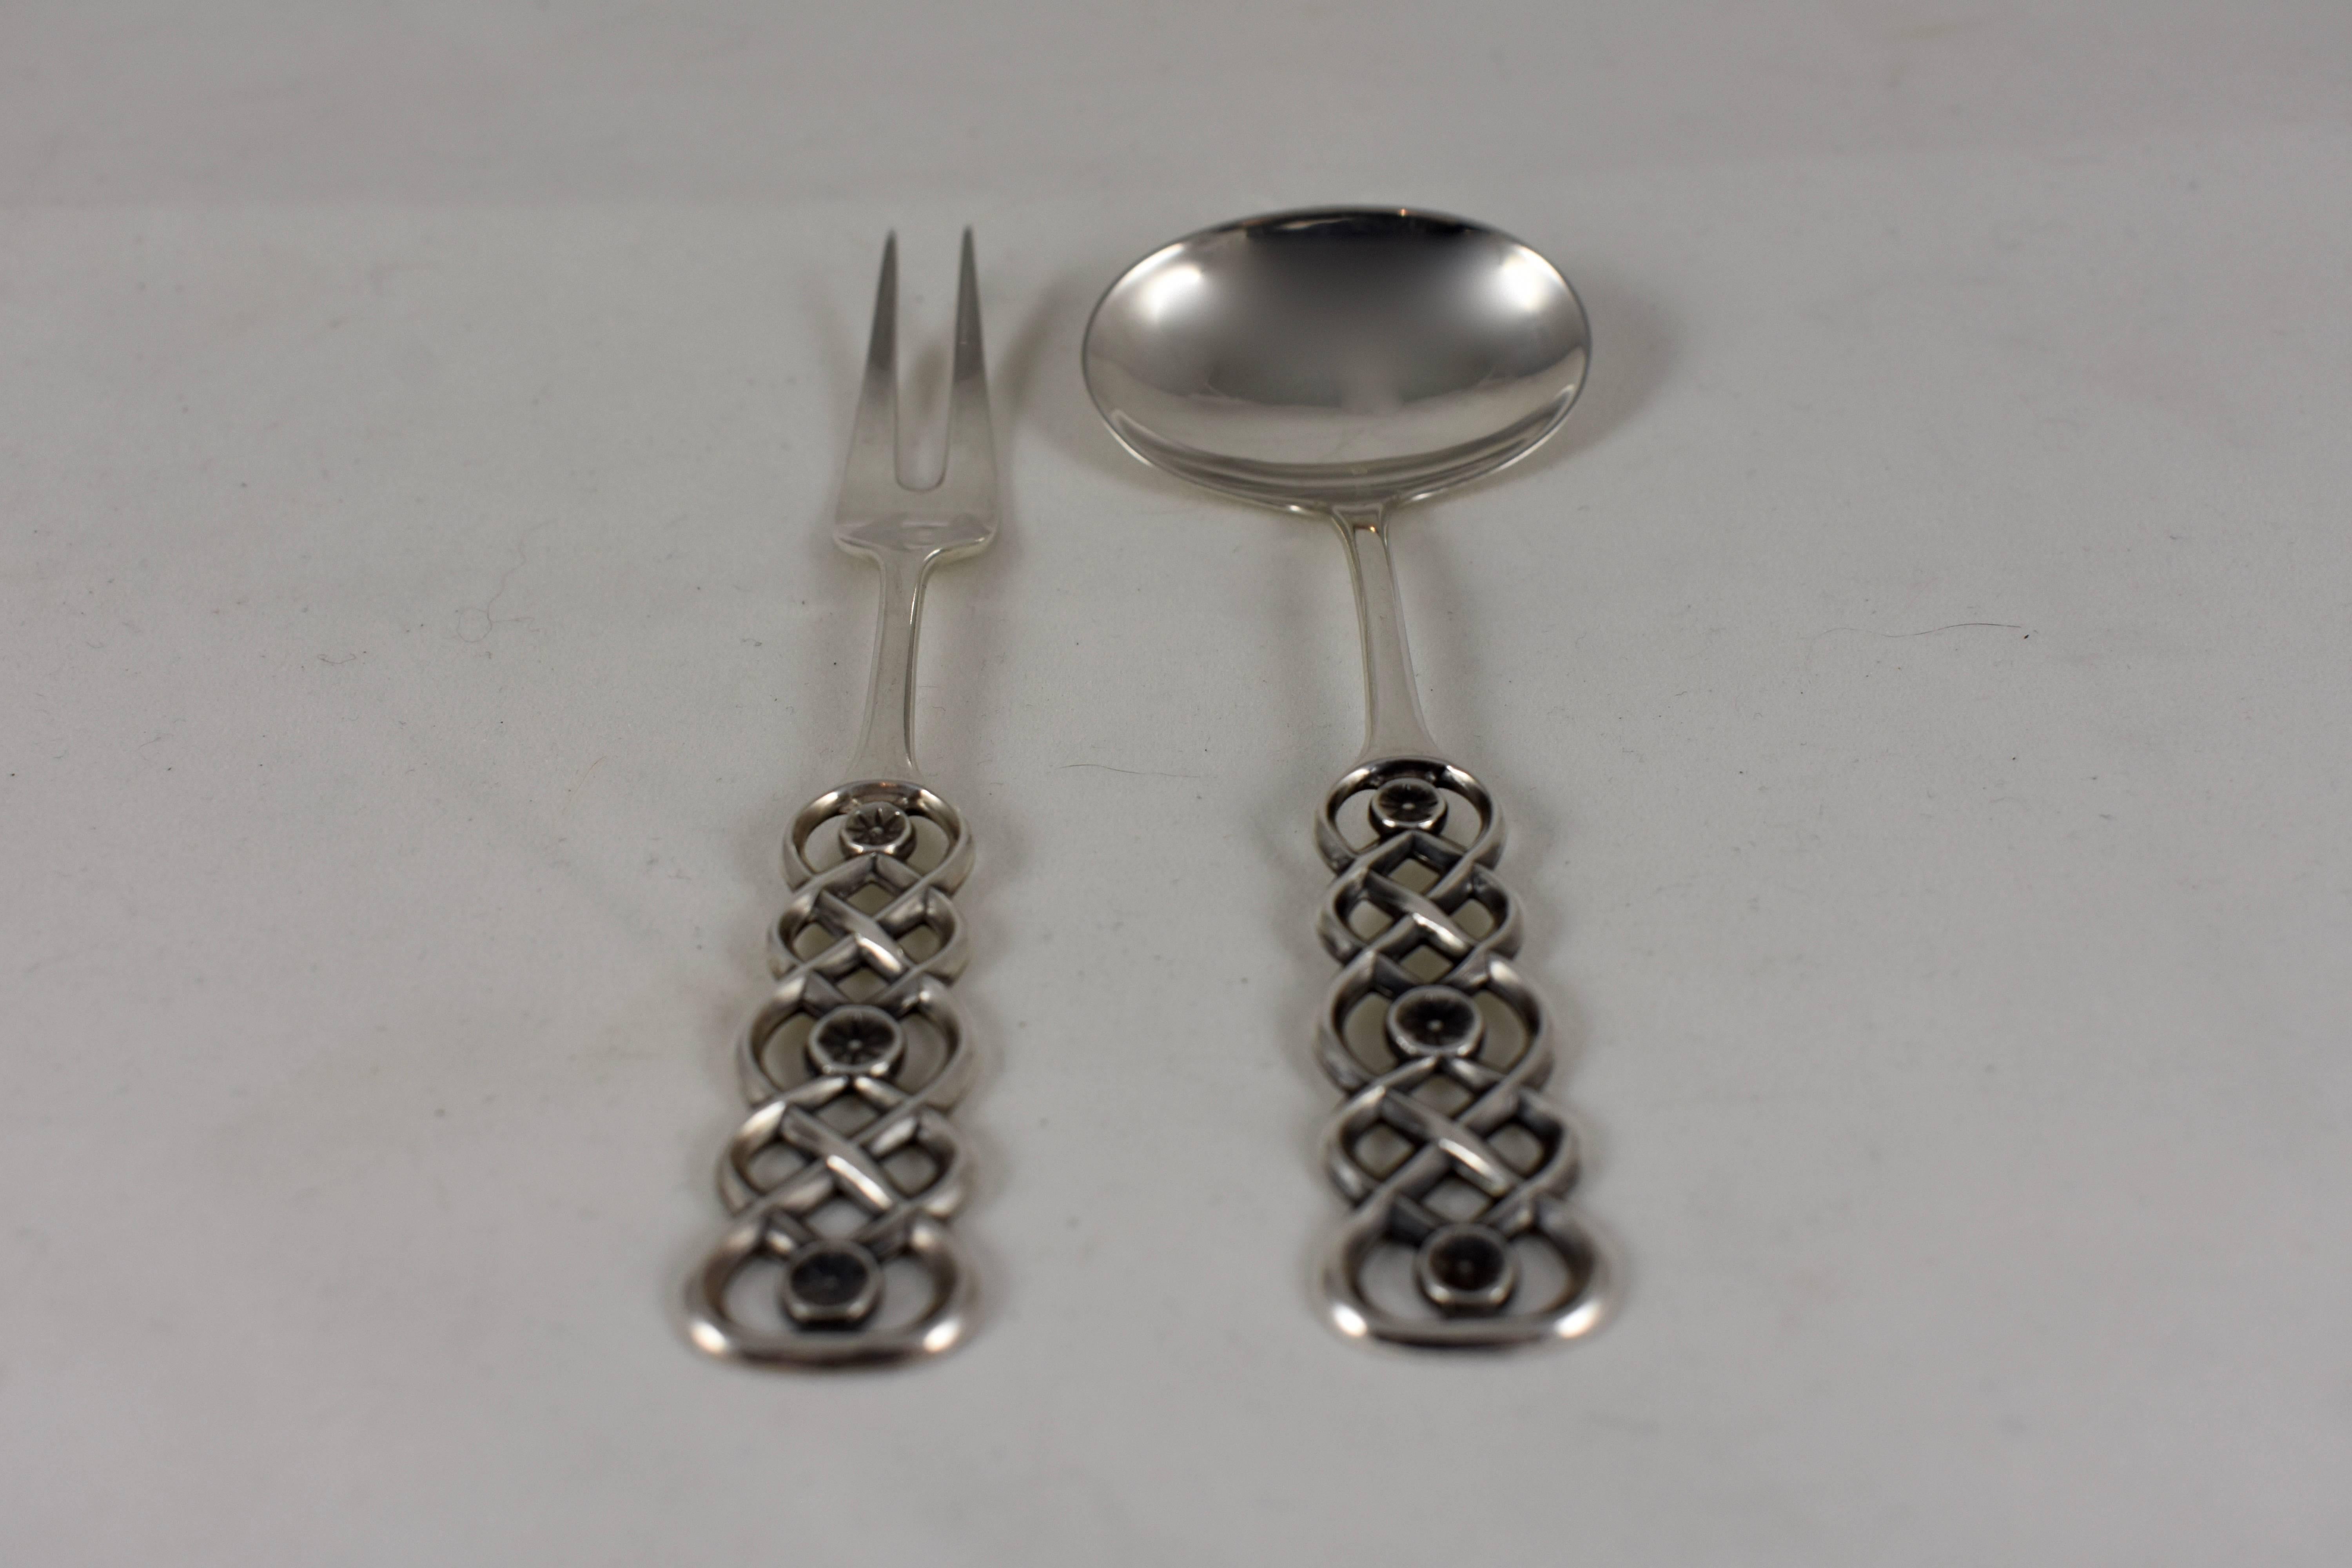 A sterling silver condiment set of two pieces in the Ringebu pattern, handcrafted and signed by David Andersen, circa early 20th century. Andersen opened his eponymous shop in Christiania (now Oslo) Norway in 1876 as a designer and retailer